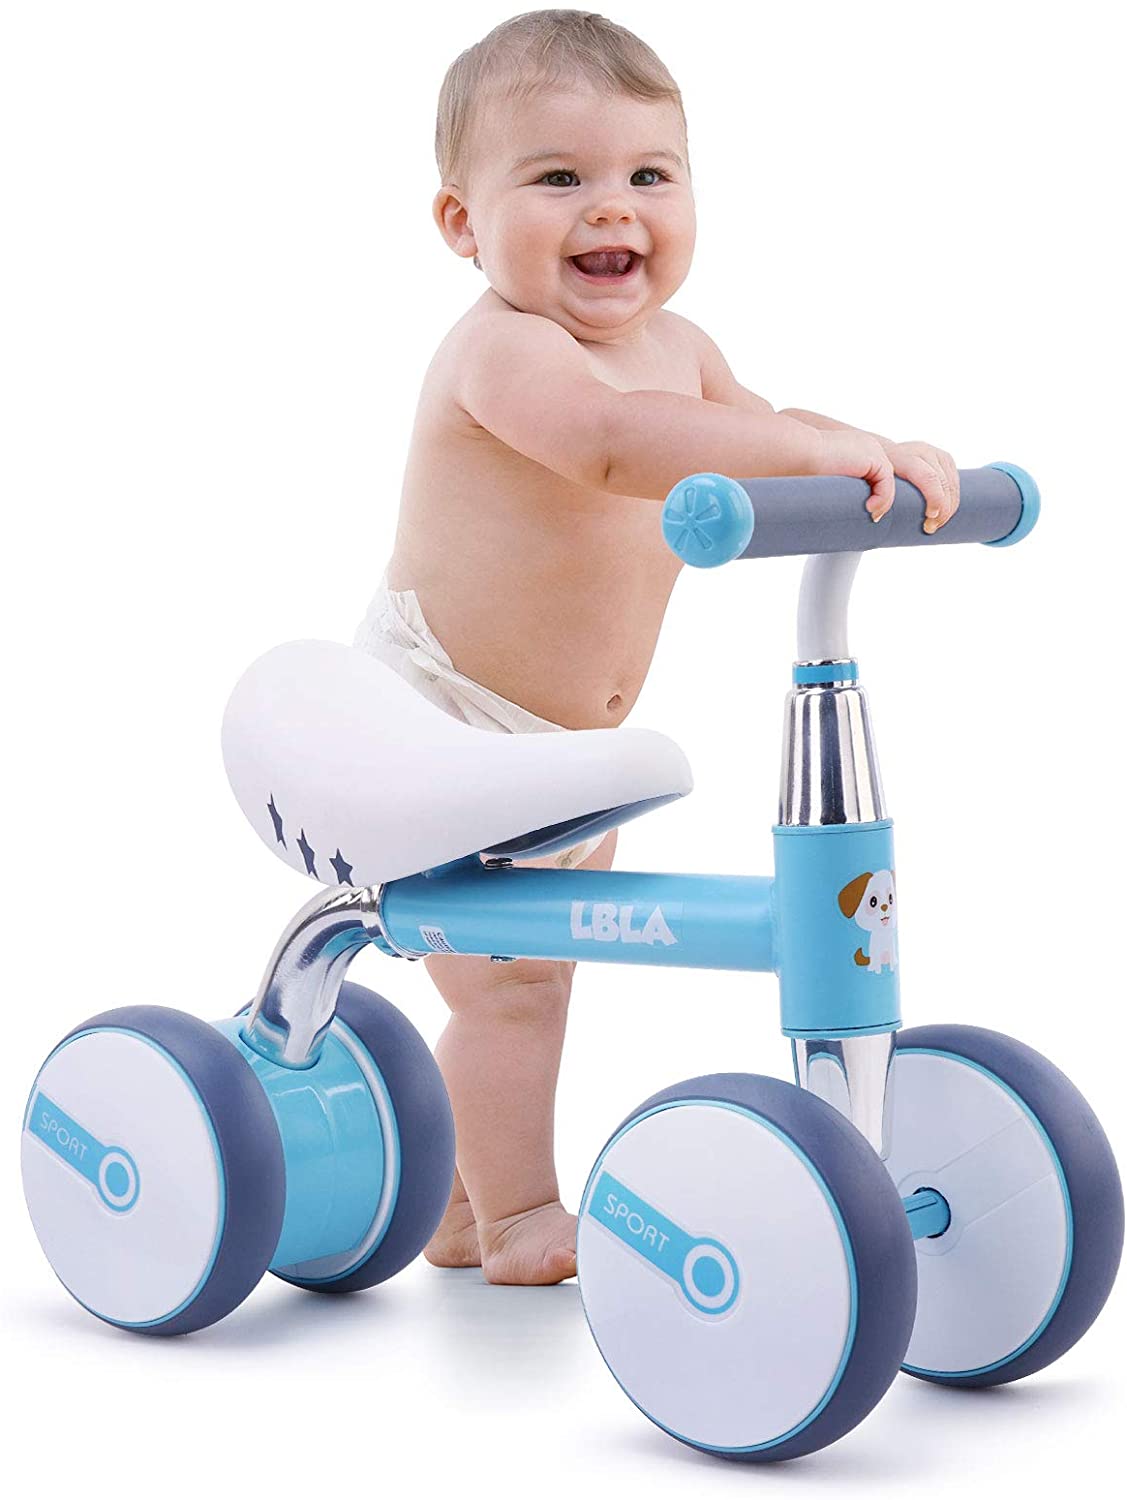 Reasonable price for Children Balance Bike Quality Assurance Factory Direct Sales -  Arkmiido Children’s Balance Bike 10-36 Months without Pedals Toddler 4 Wheels Riding Toy for 1 Year Old B...